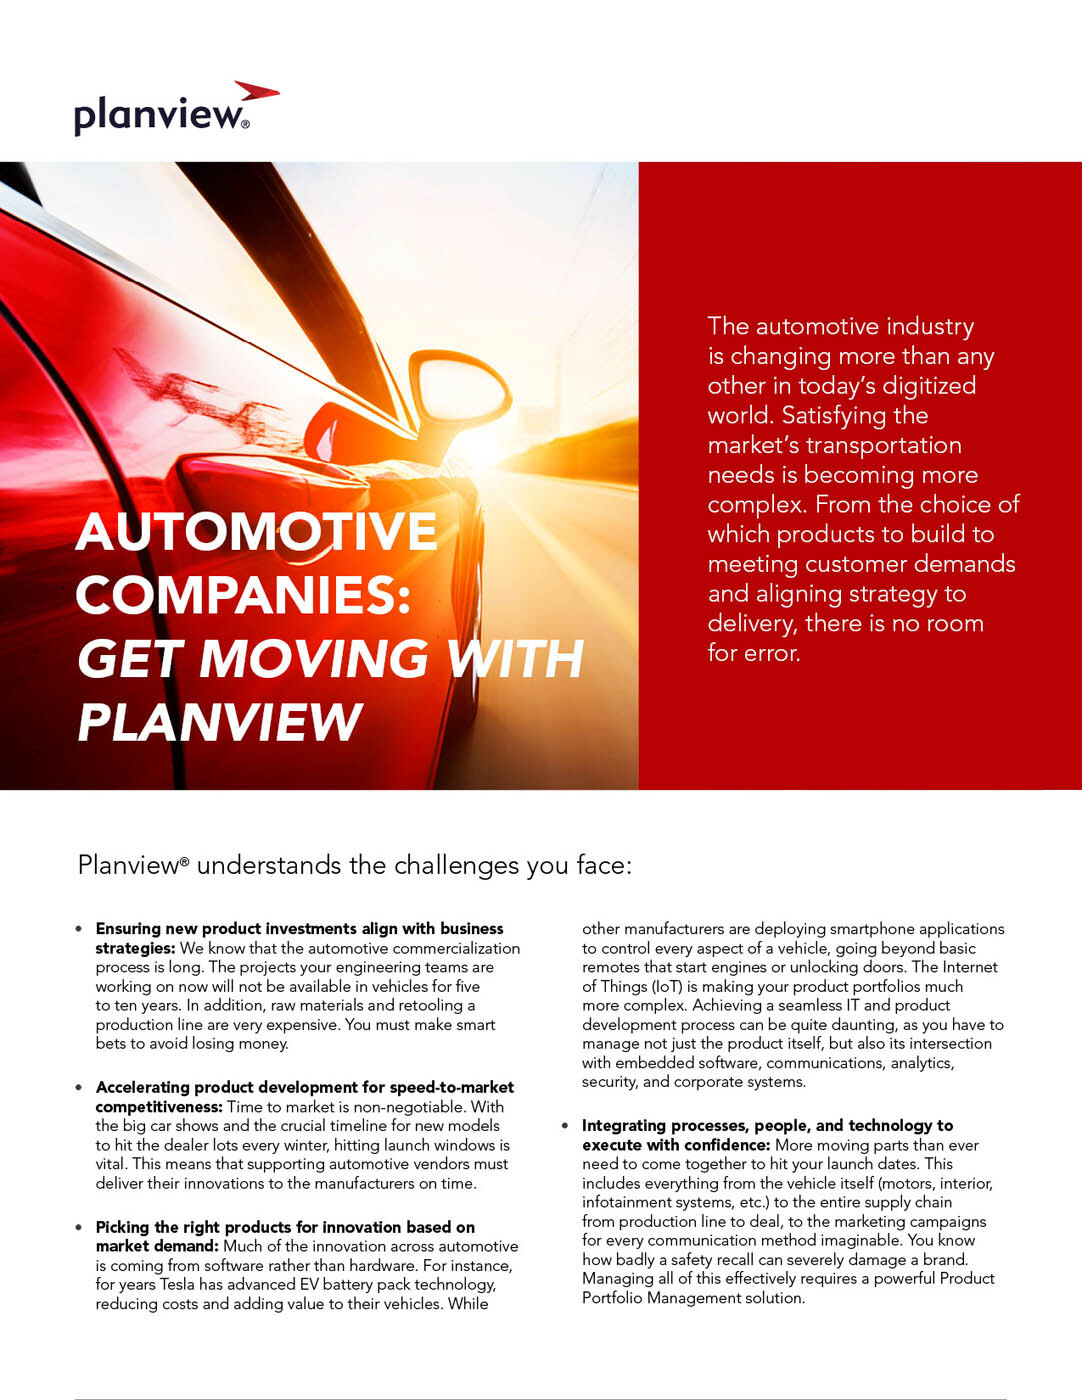 Automotive Companies: Get Moving With Planview